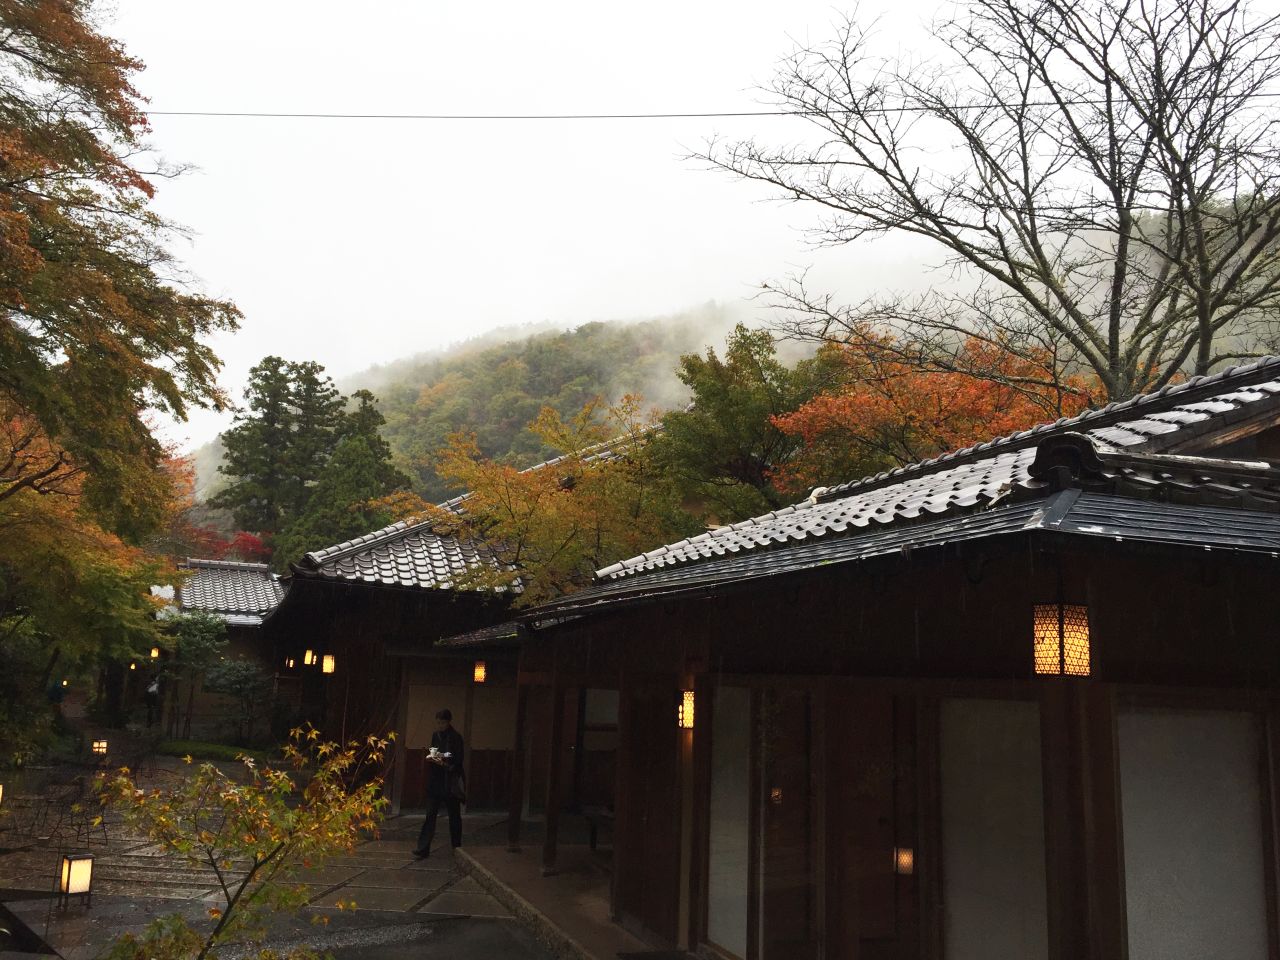 The changeable weather -- "Arashiyama" means "storm mountain" in Japanese -- makes Hoshinoya particularly atmospheric. 